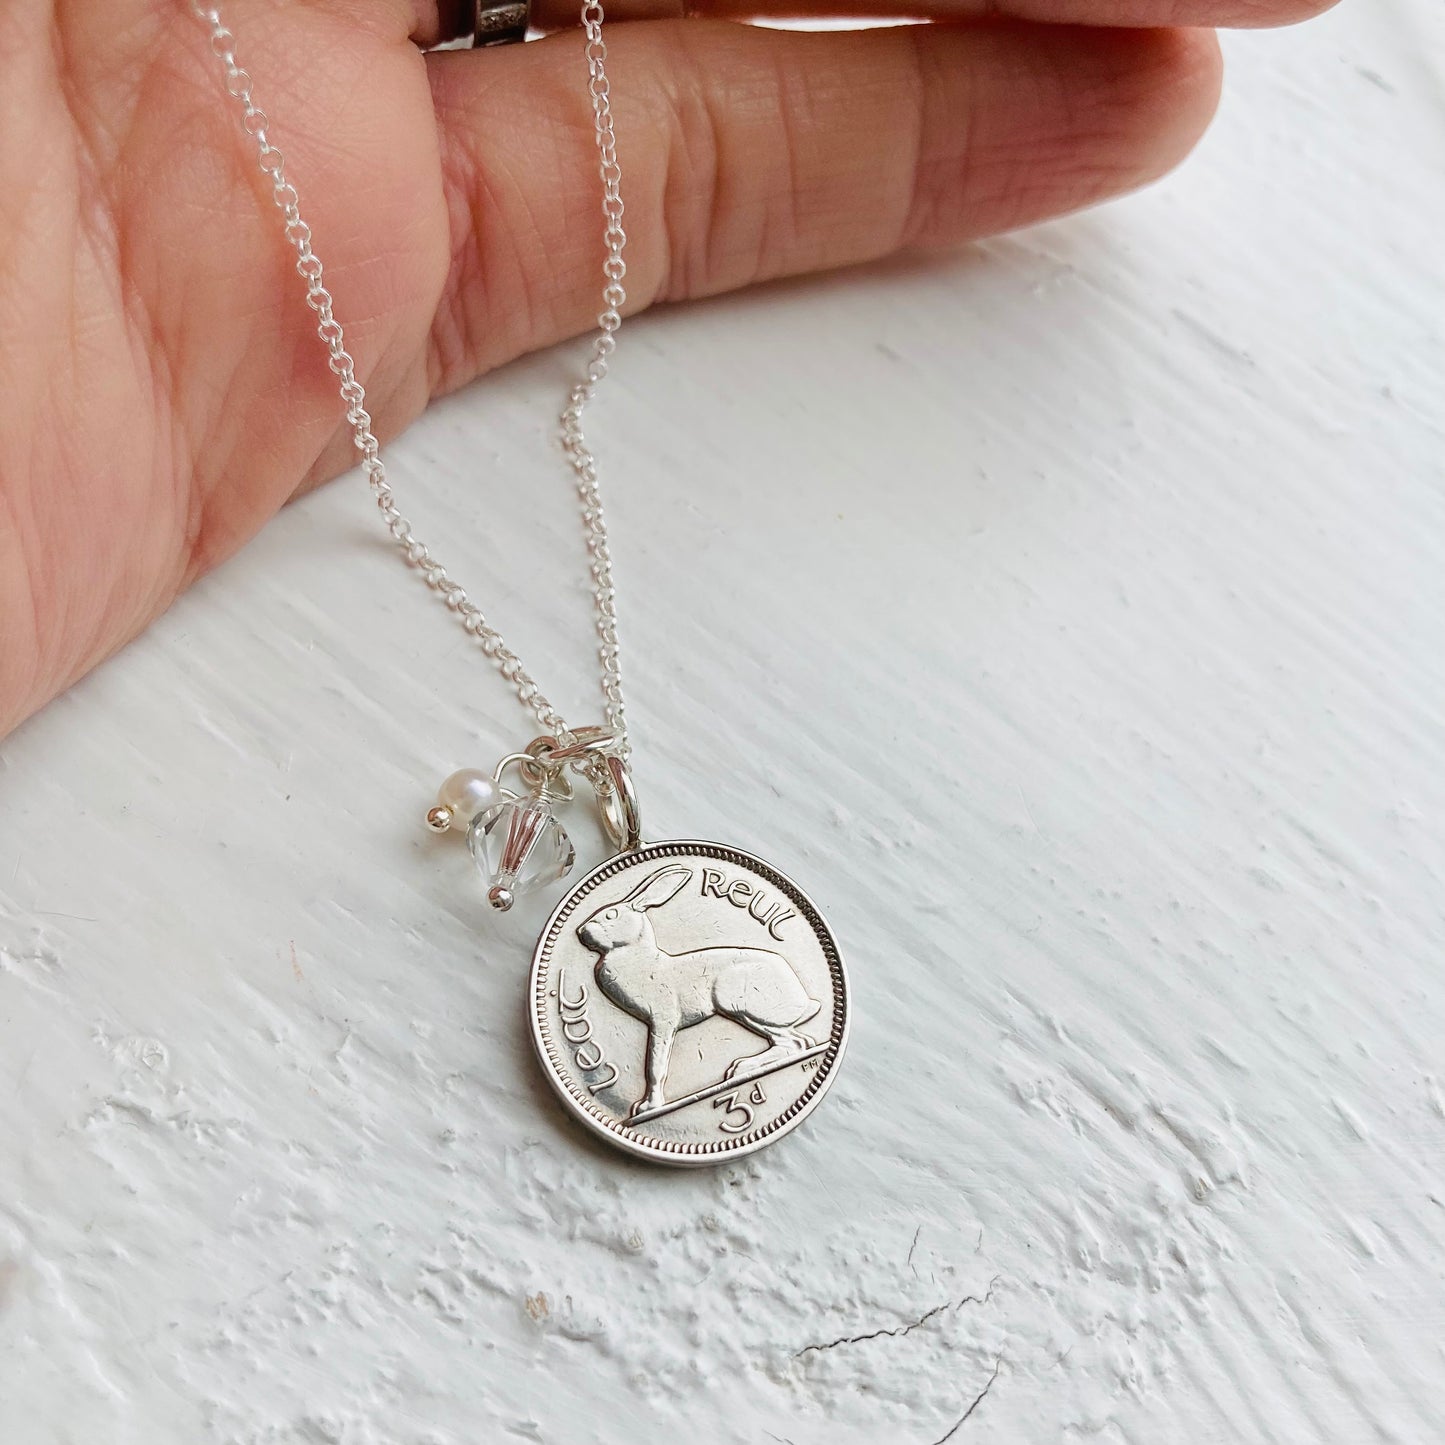 60th birthday gifts for women, 1964 coin necklaces by Prenoa